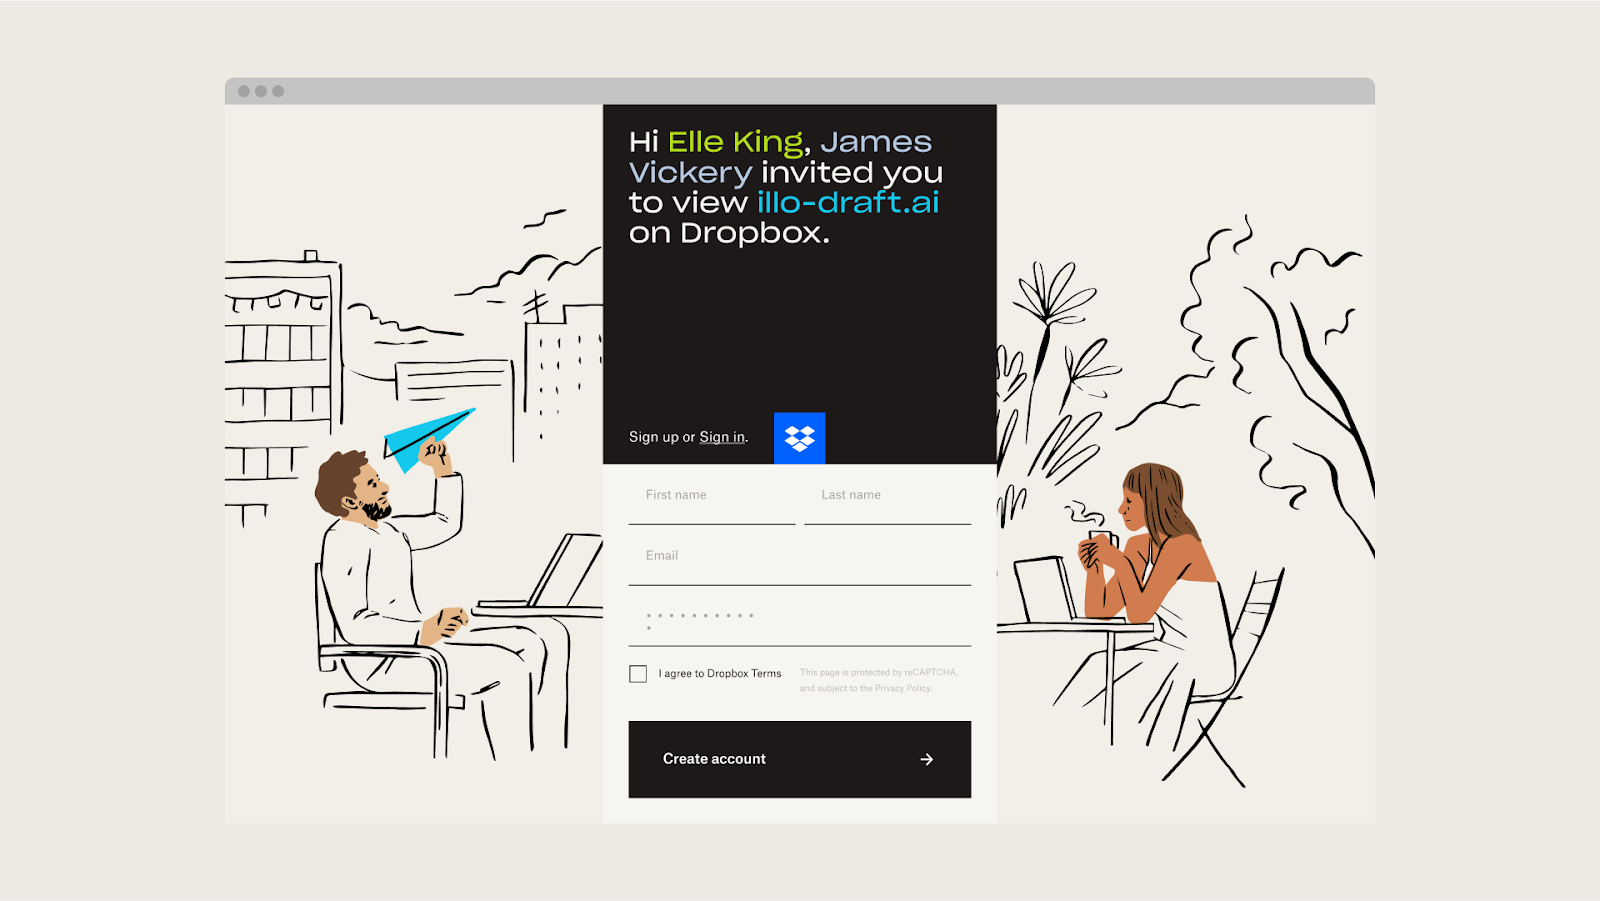 Dropbox’s fun and bright graphic style_readymag blog